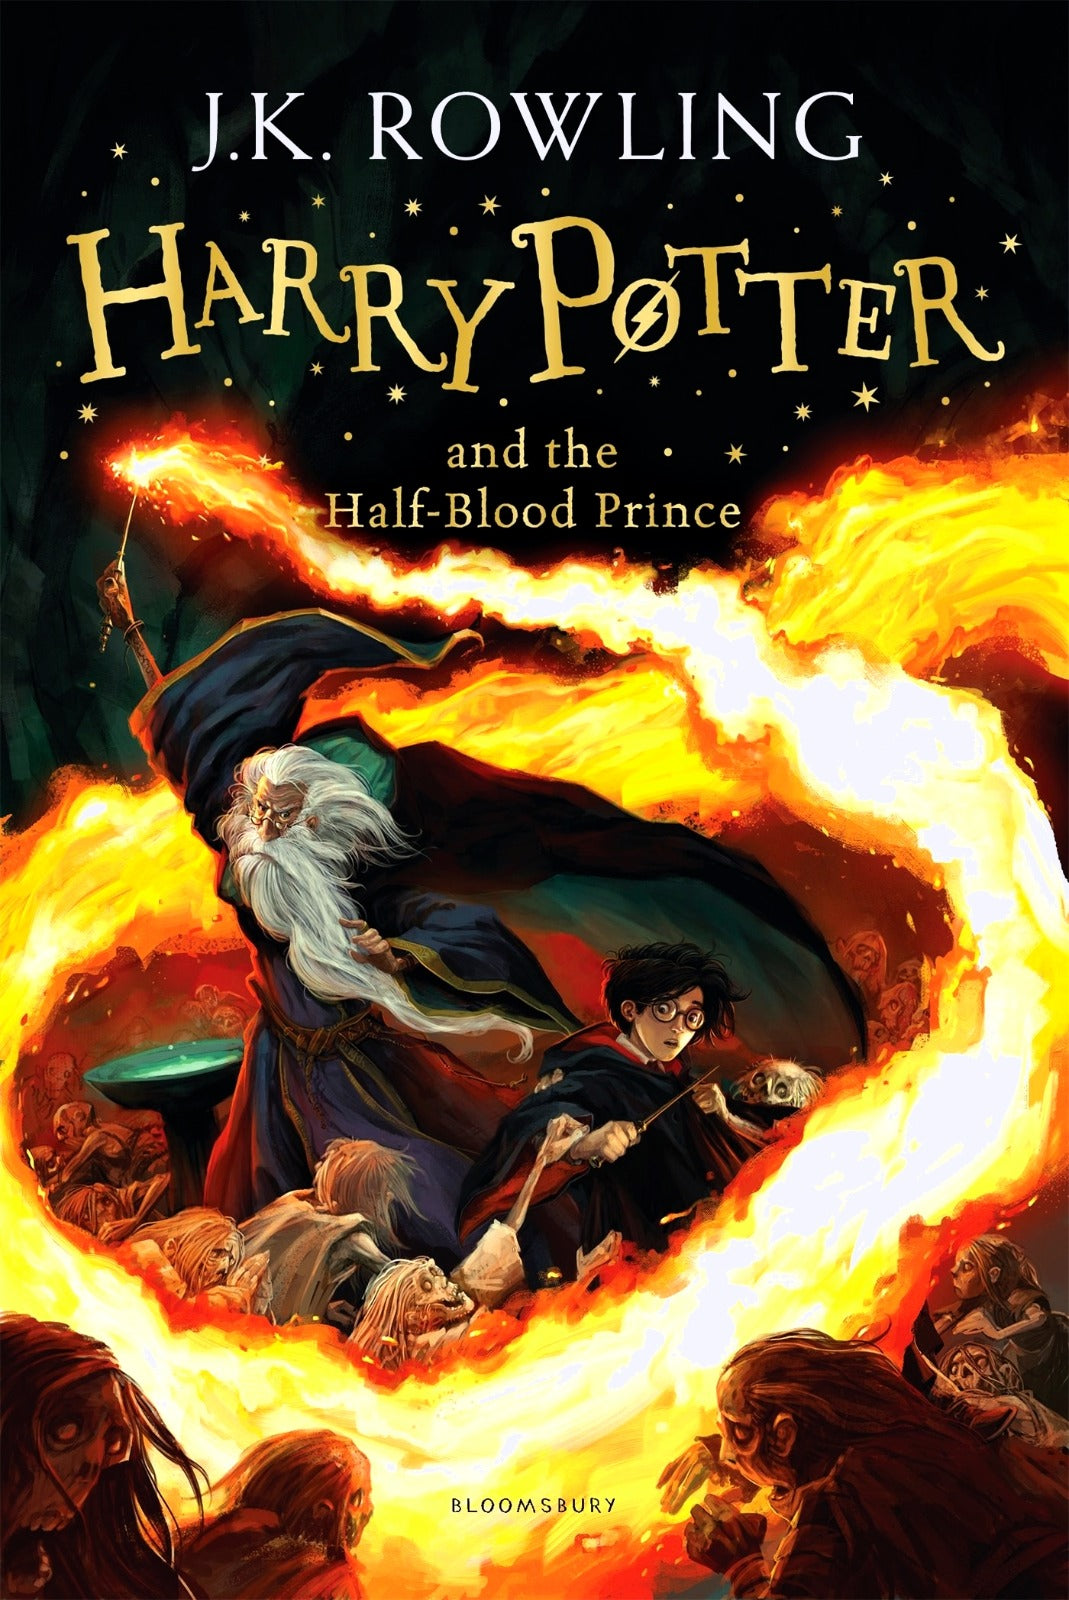 Harry Potter #6 Harry Potter and the Half-Blood Prince